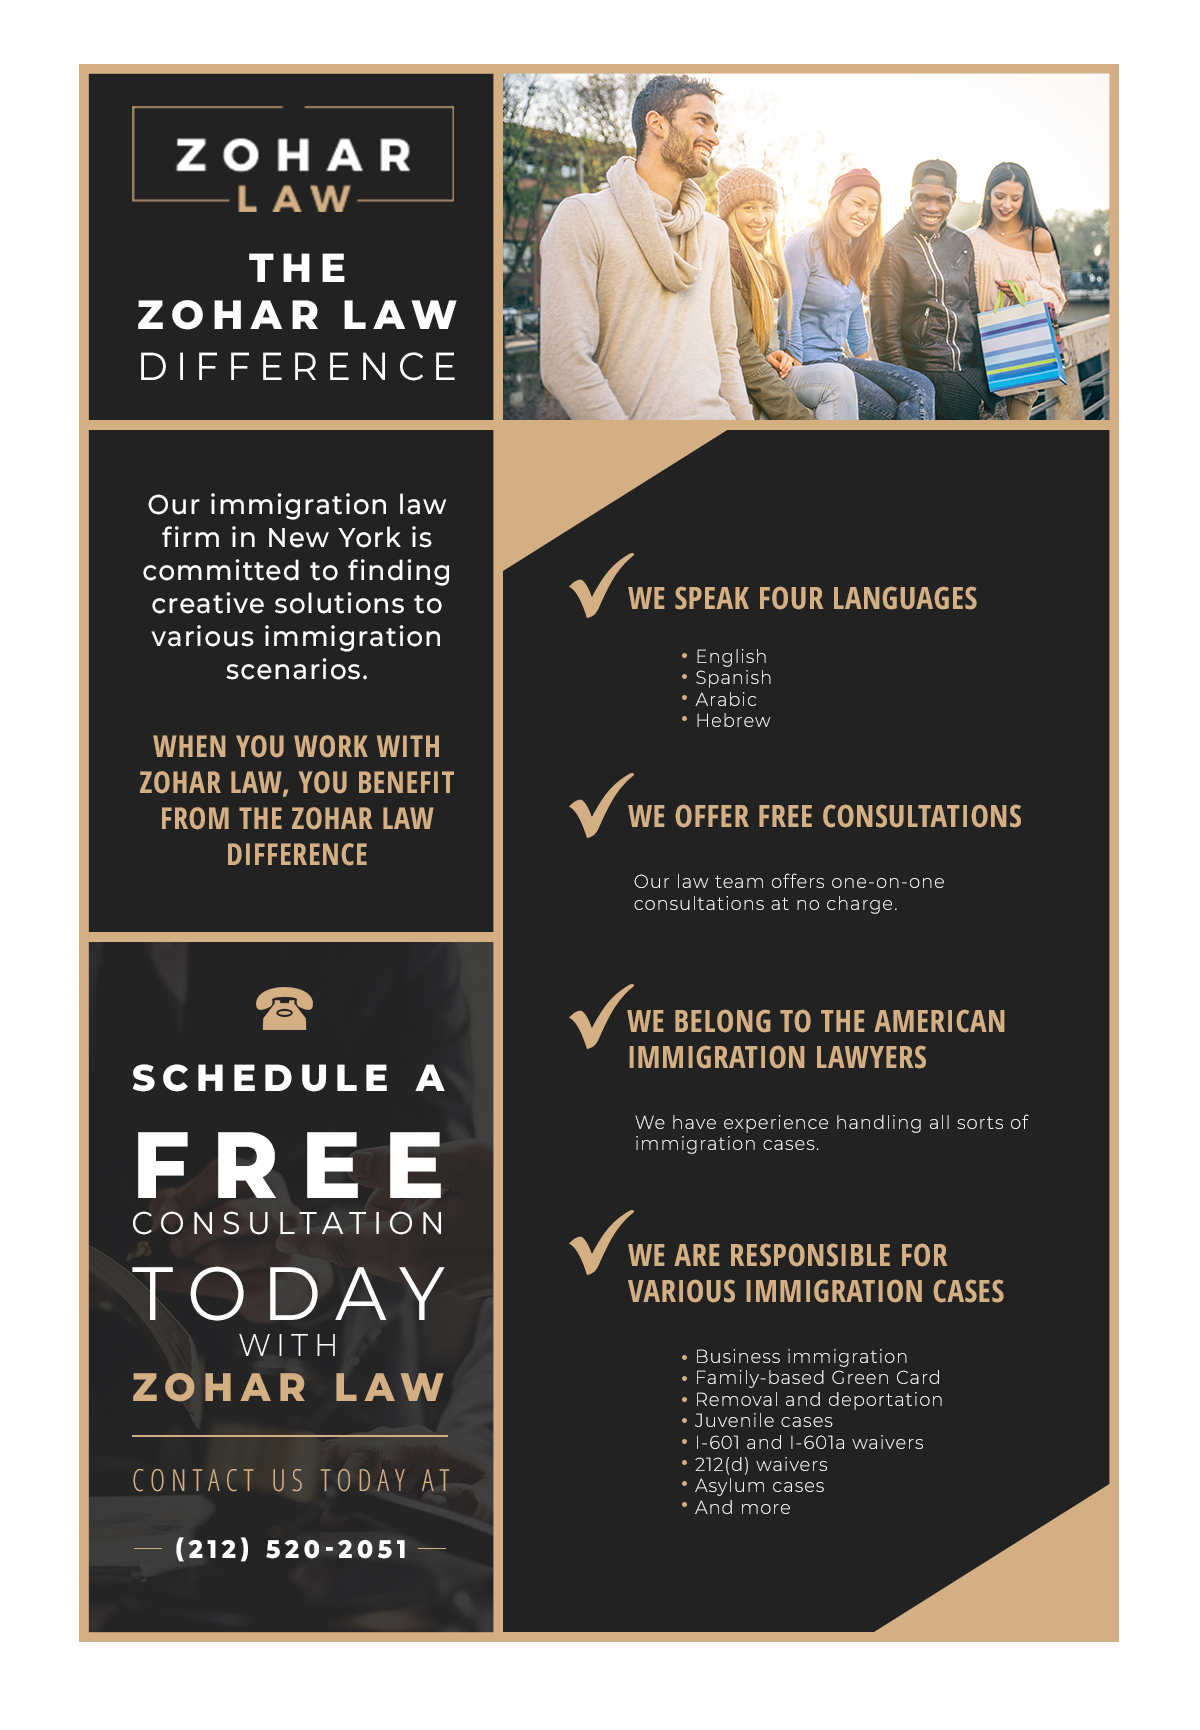 Zohar-Law-Differences-Infographic-5cd2f55297207.png